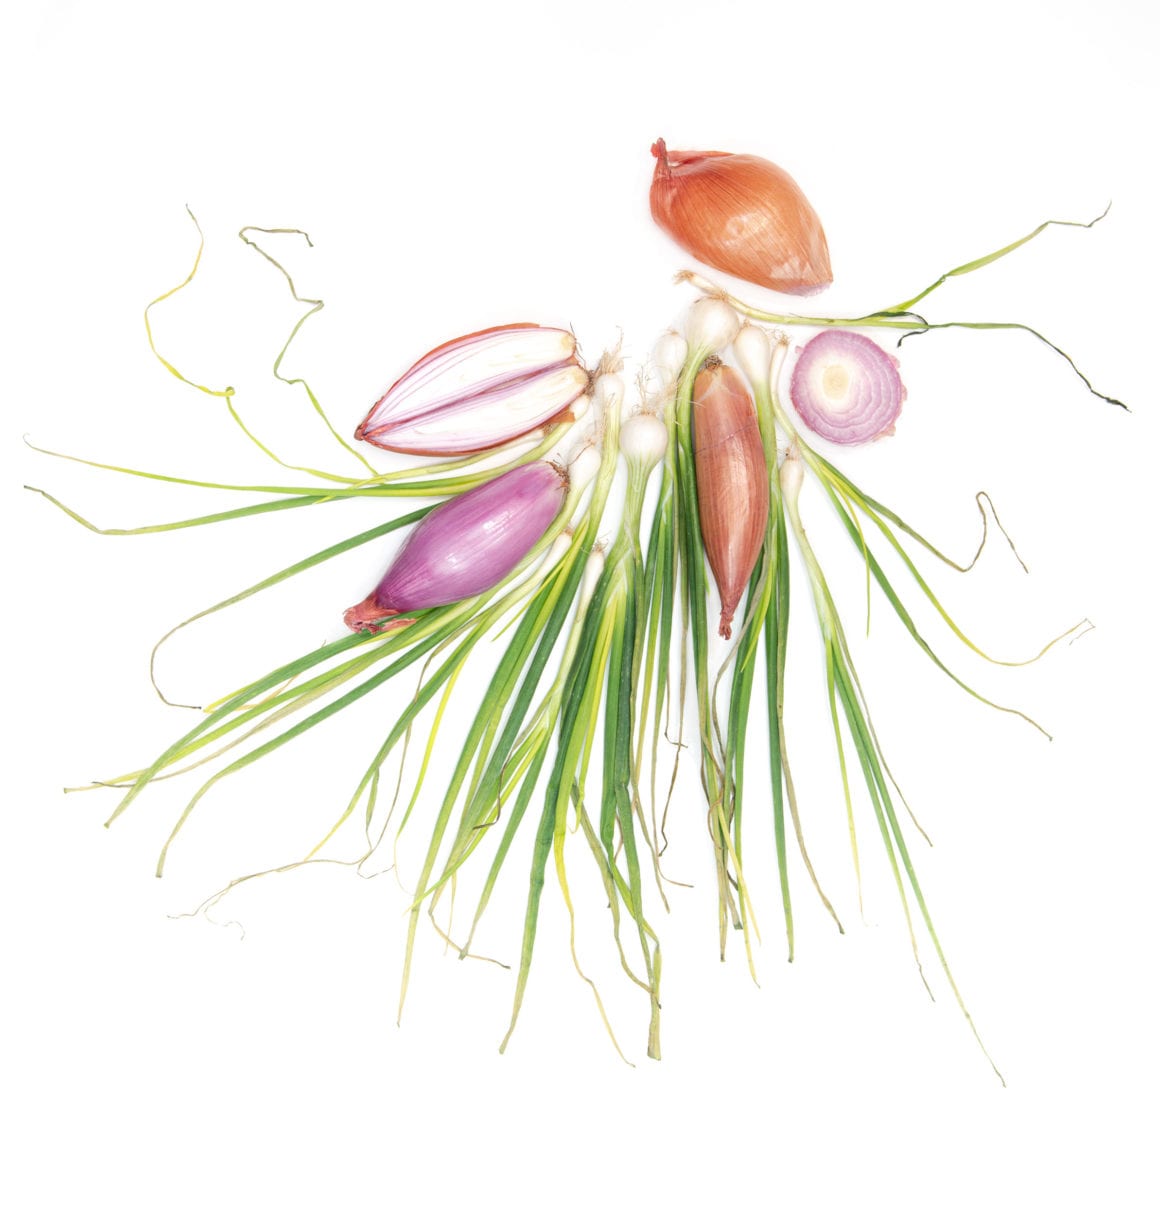 photograph of shallots, photograph of onions, photograph of spring onions, onion, shallot, spring onion, vegetables, still photographer, still life photography, white background, green, purple, naina.co, naina.com, naina redhu, lifestyle photographer india, still life photographer india